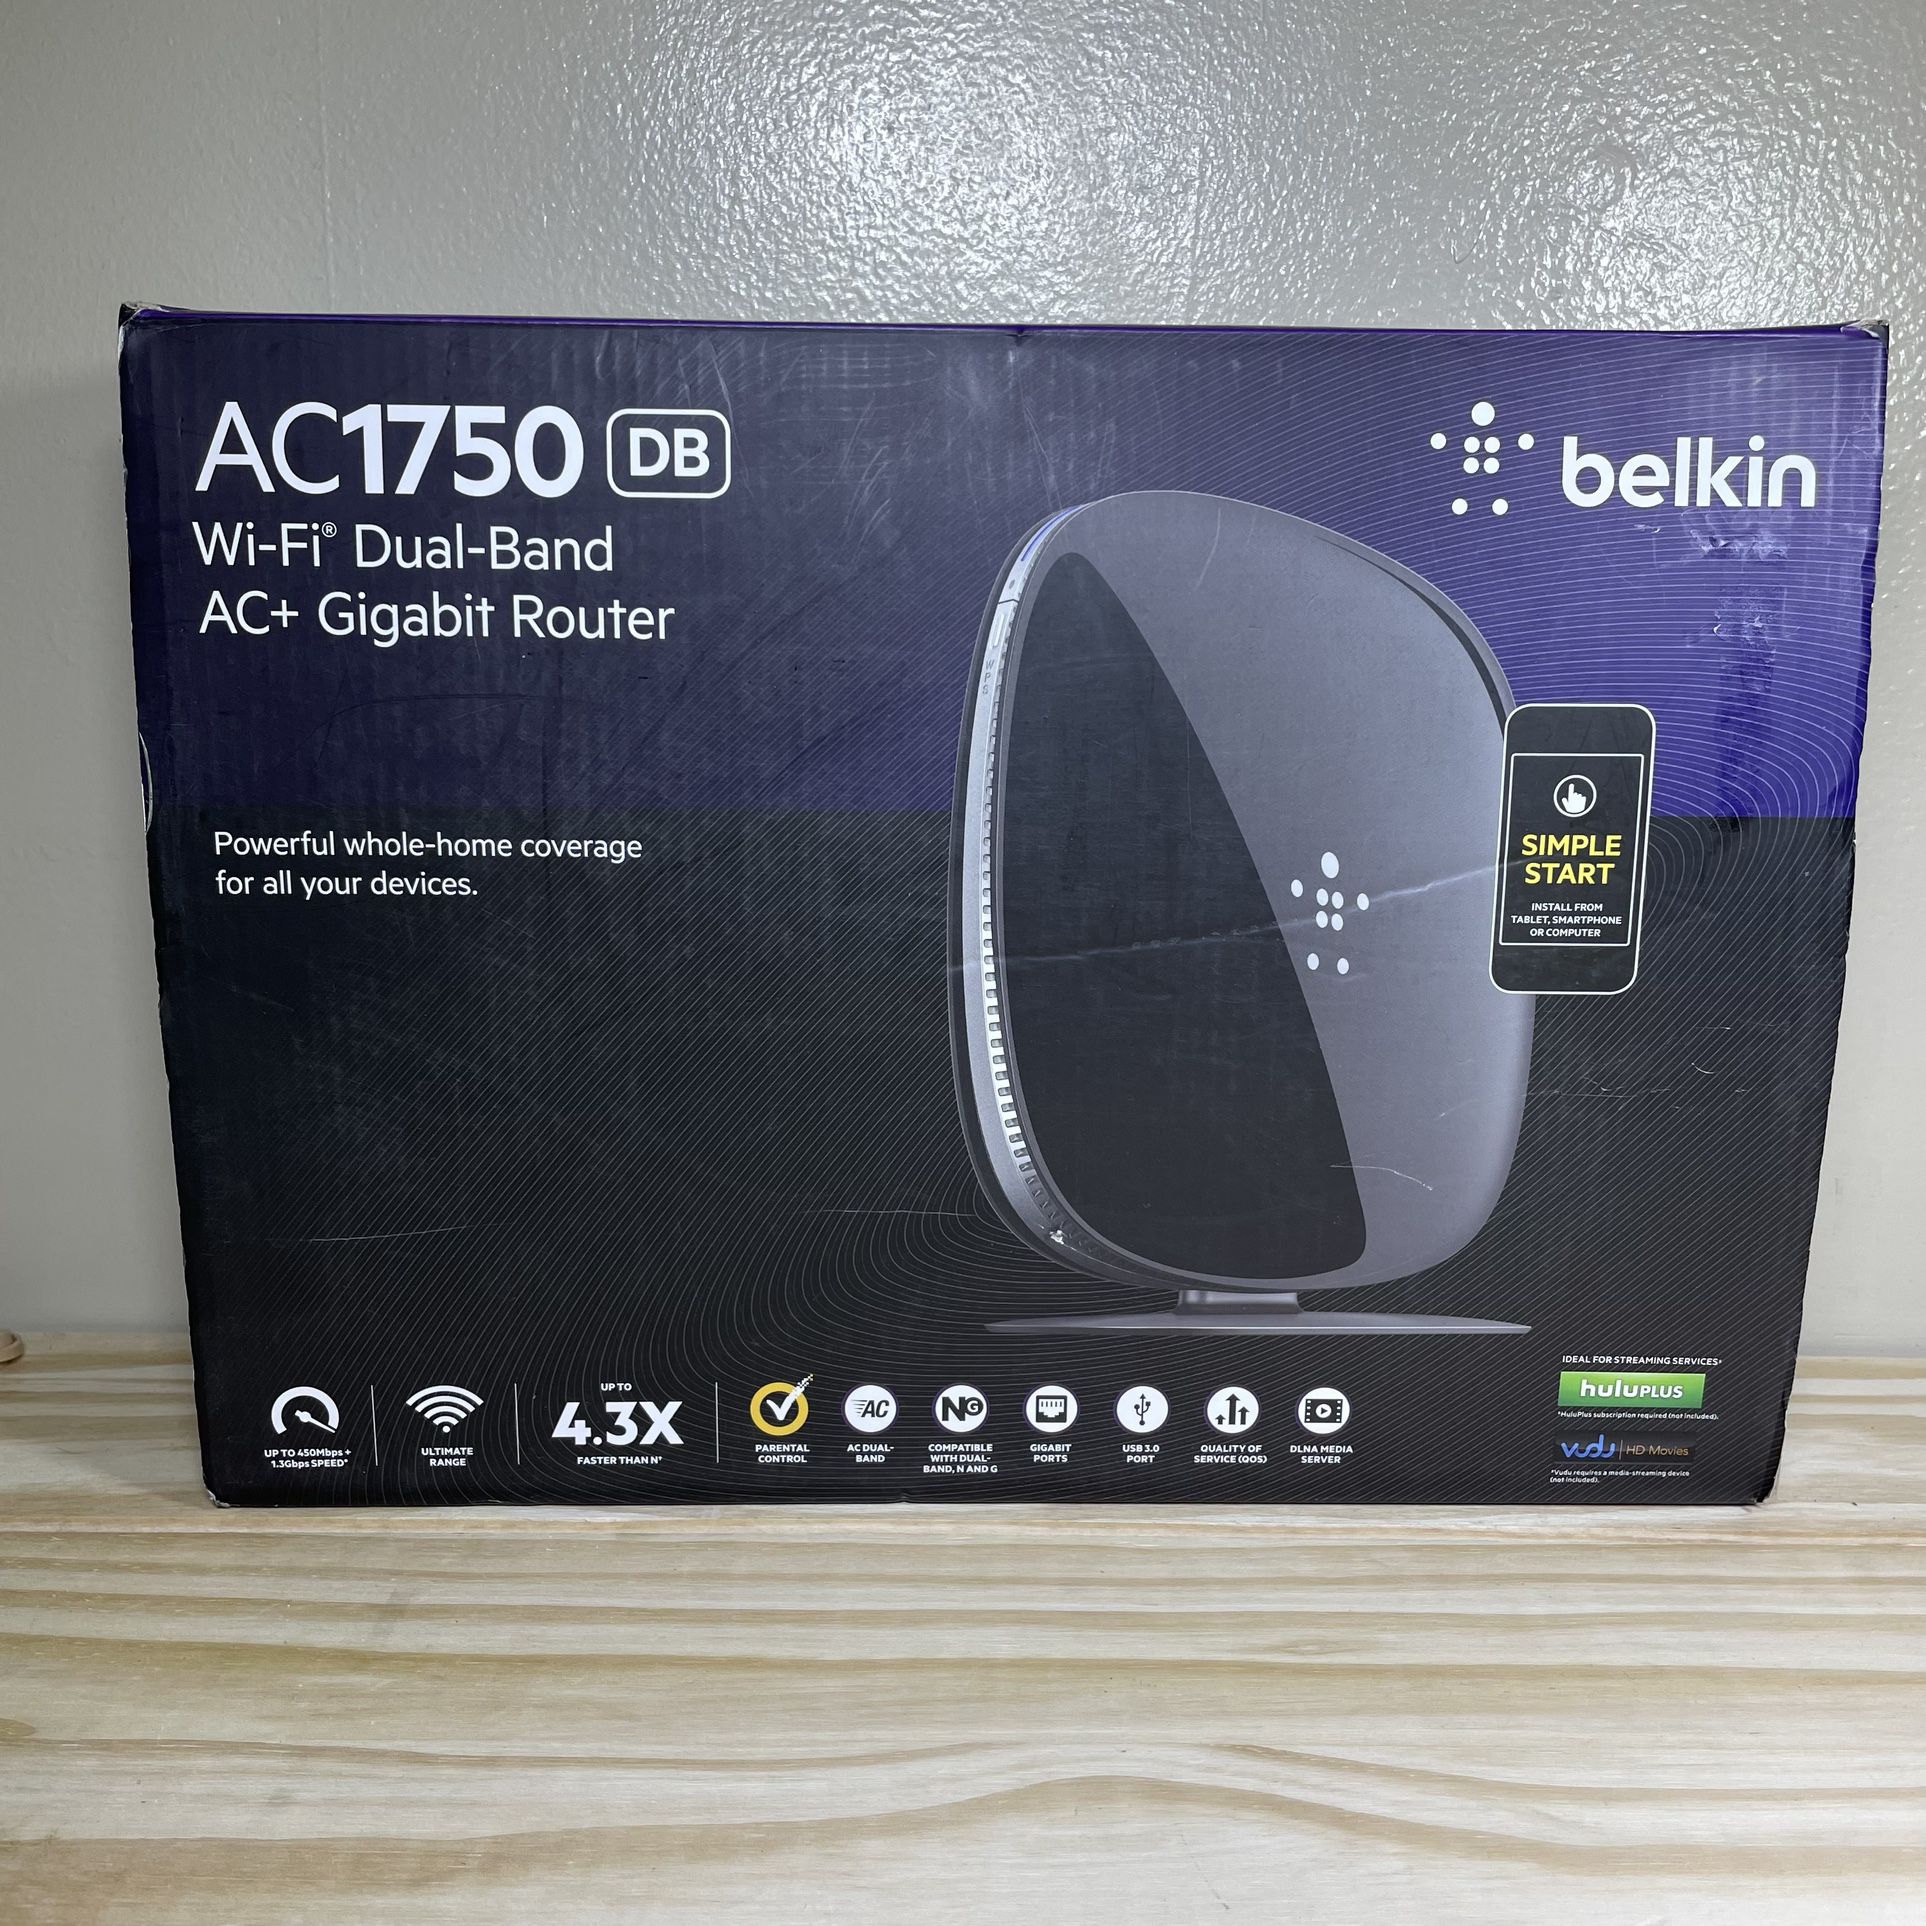 BELKIN - F9K1115_V2 - AC1750 Gigabit Wireless Dual Band Wi-Fi Router UOB TESTED!.  Used open box  Check out my other cool listings!!!  (: I might have